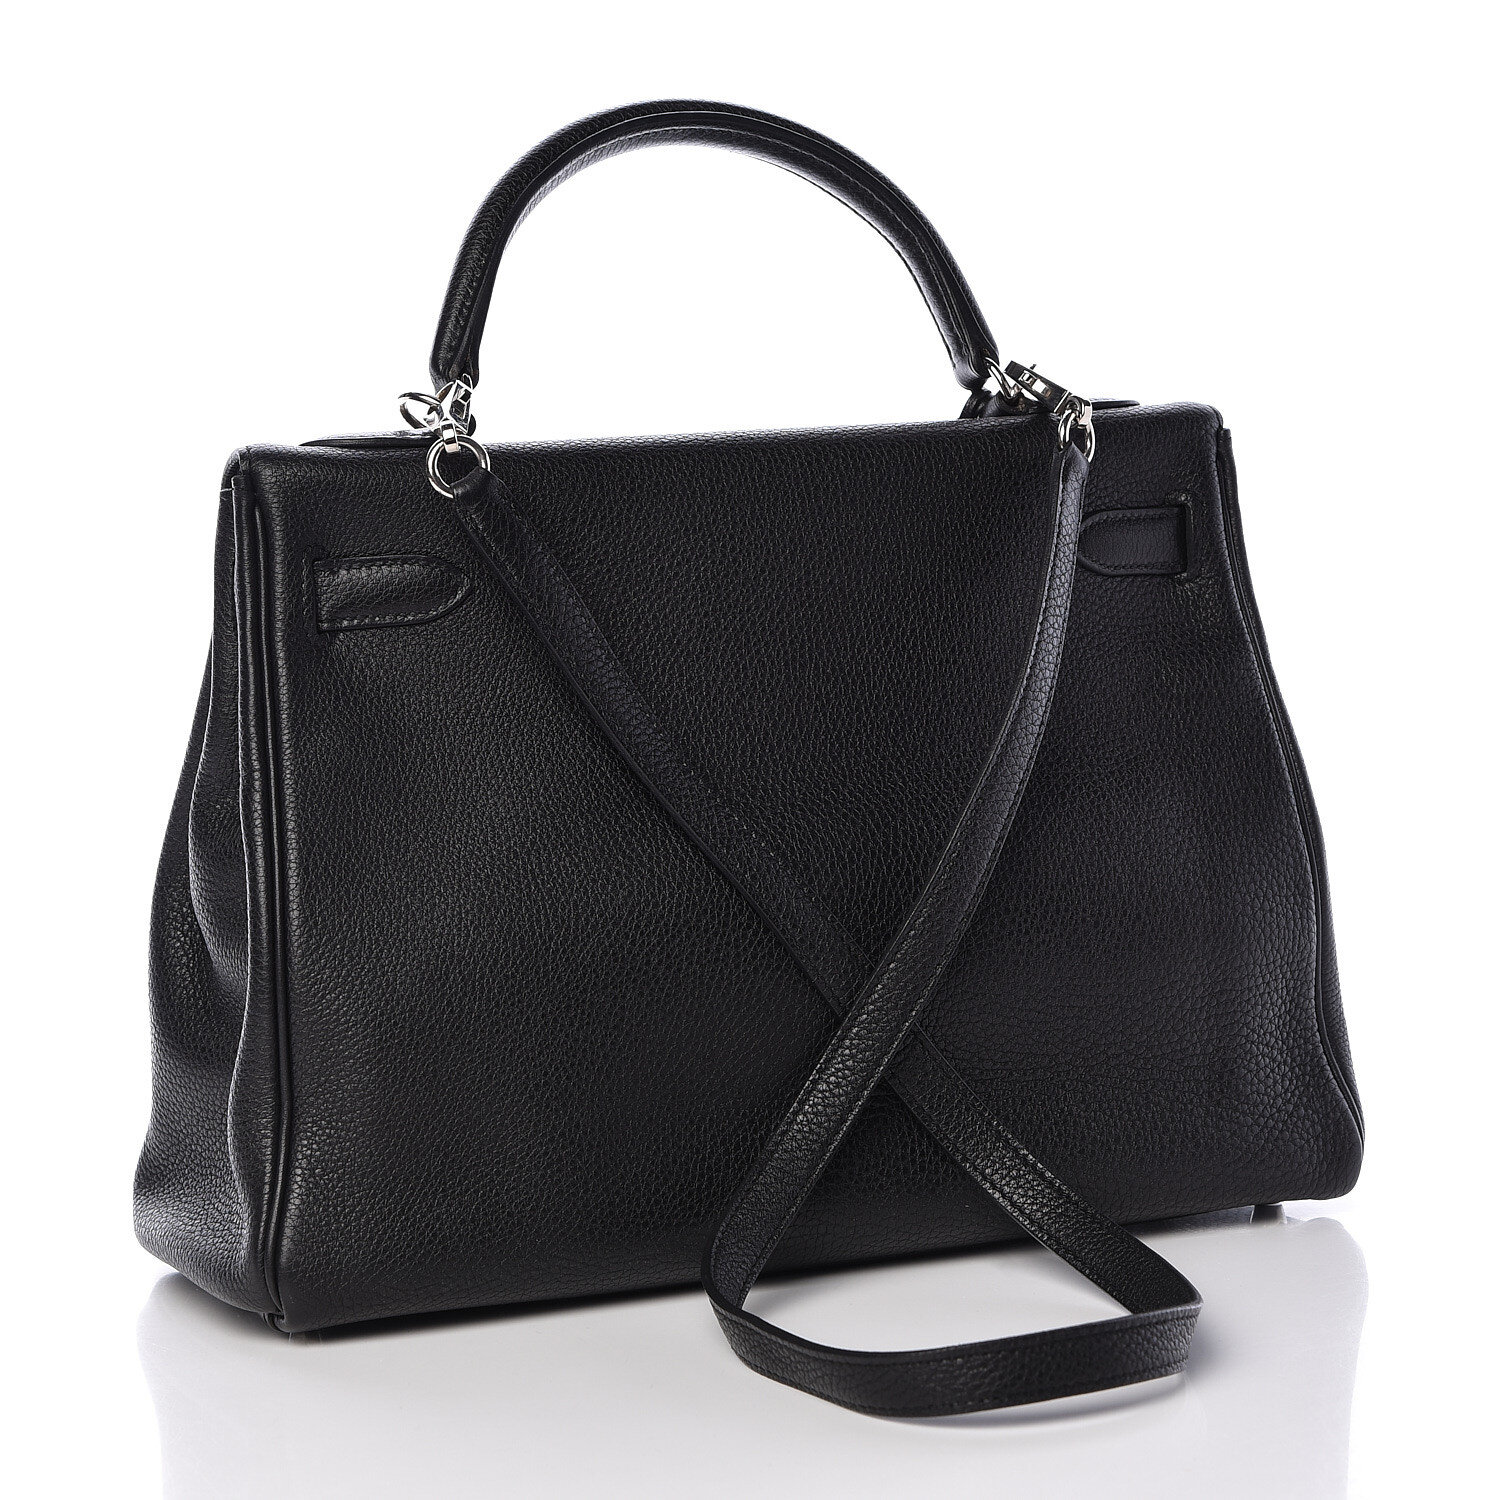 hermes-togo-kelly-retourne-32-black-available-for-sale-collecting-luxury-2.jpg